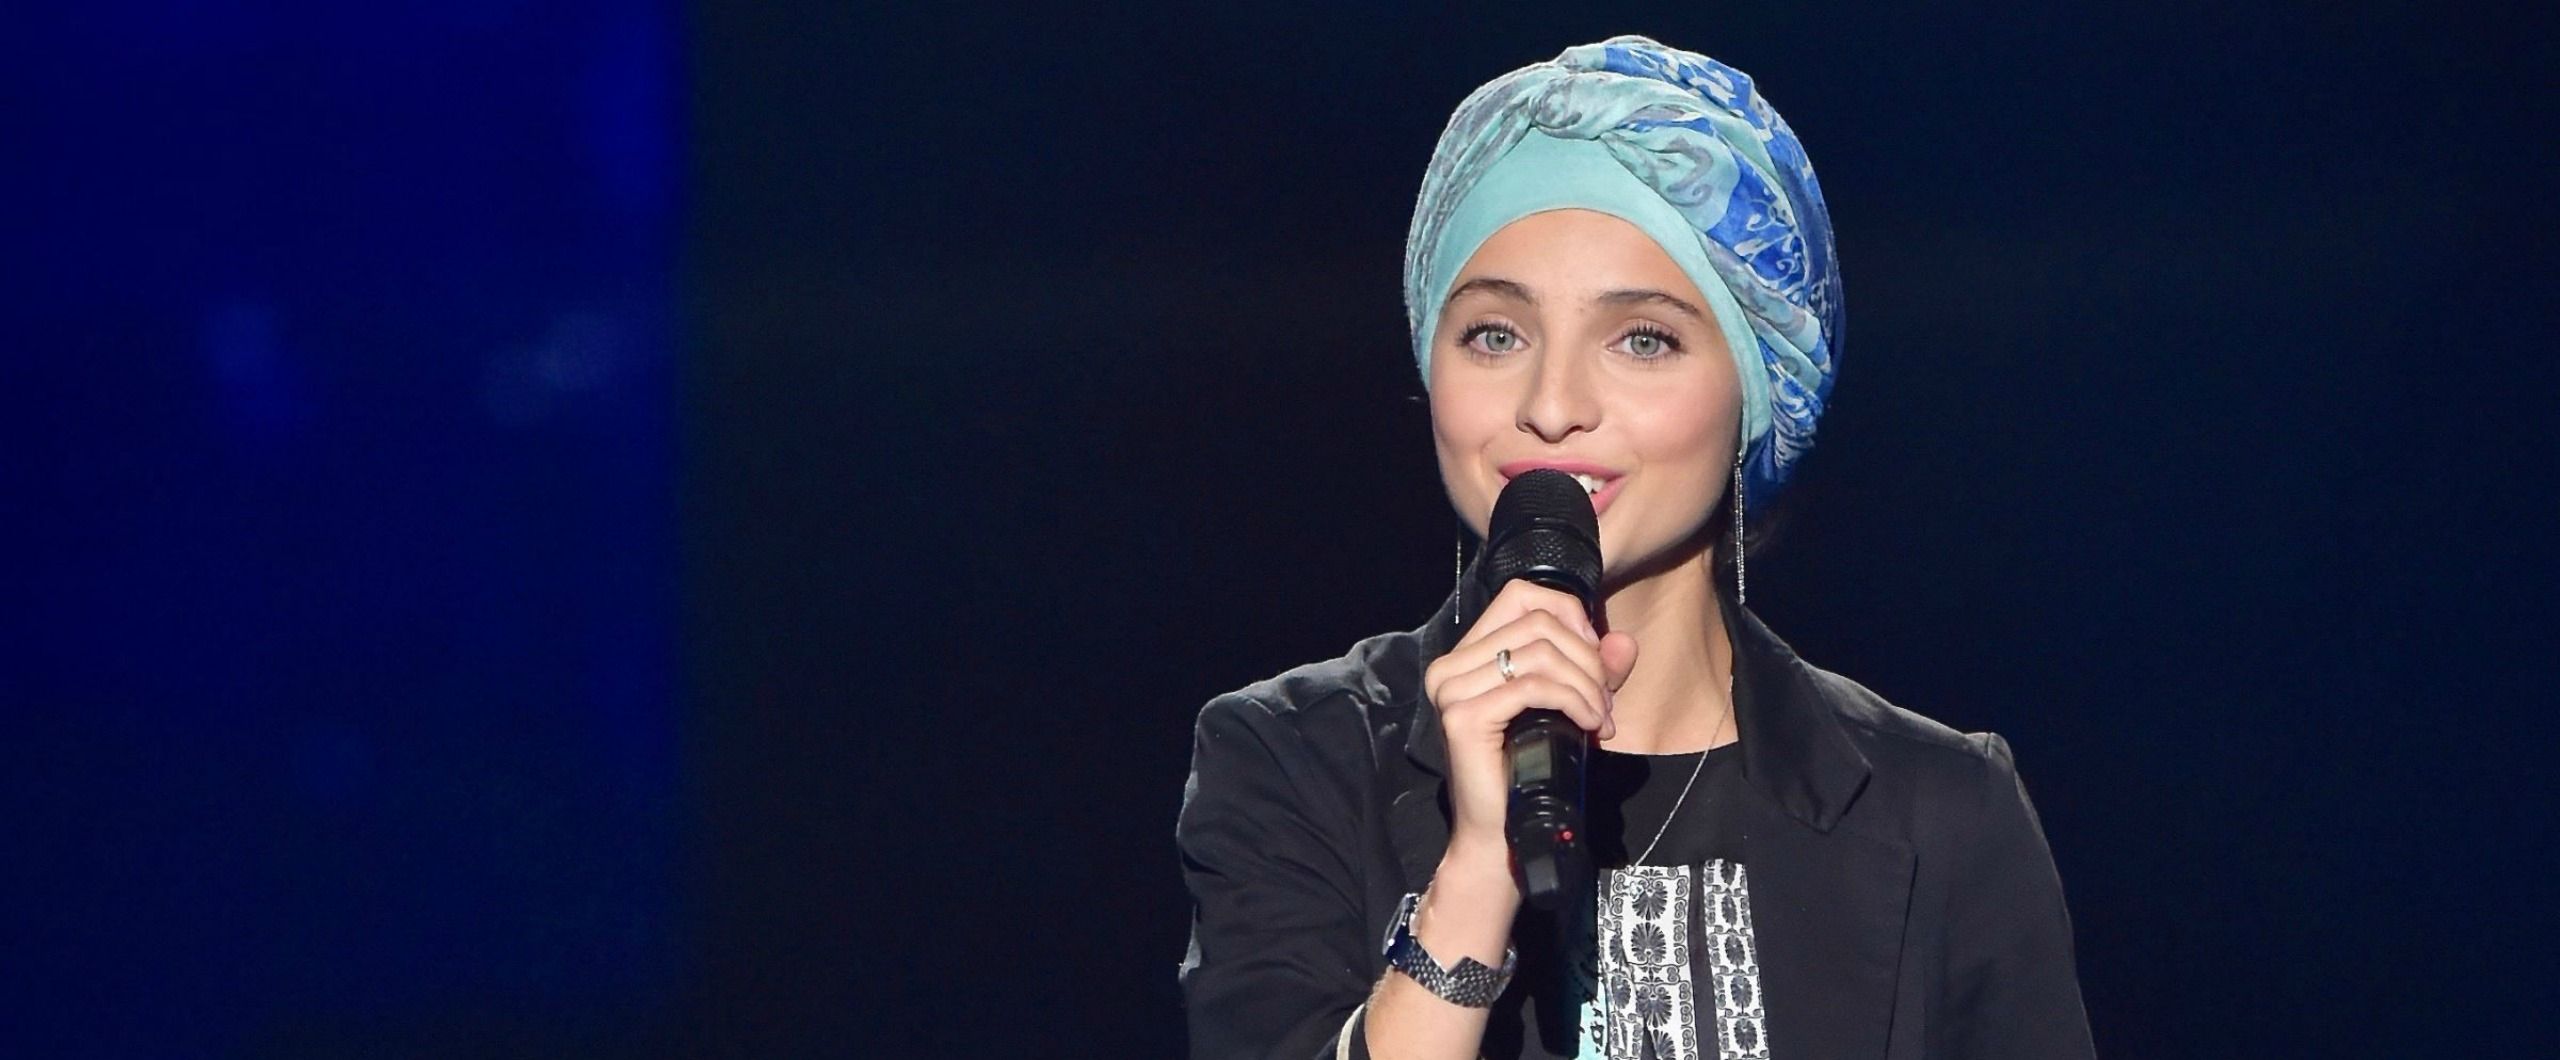 In France, Furor Over a Muslim Reality Show Star Reveals Deeper Tensions picture